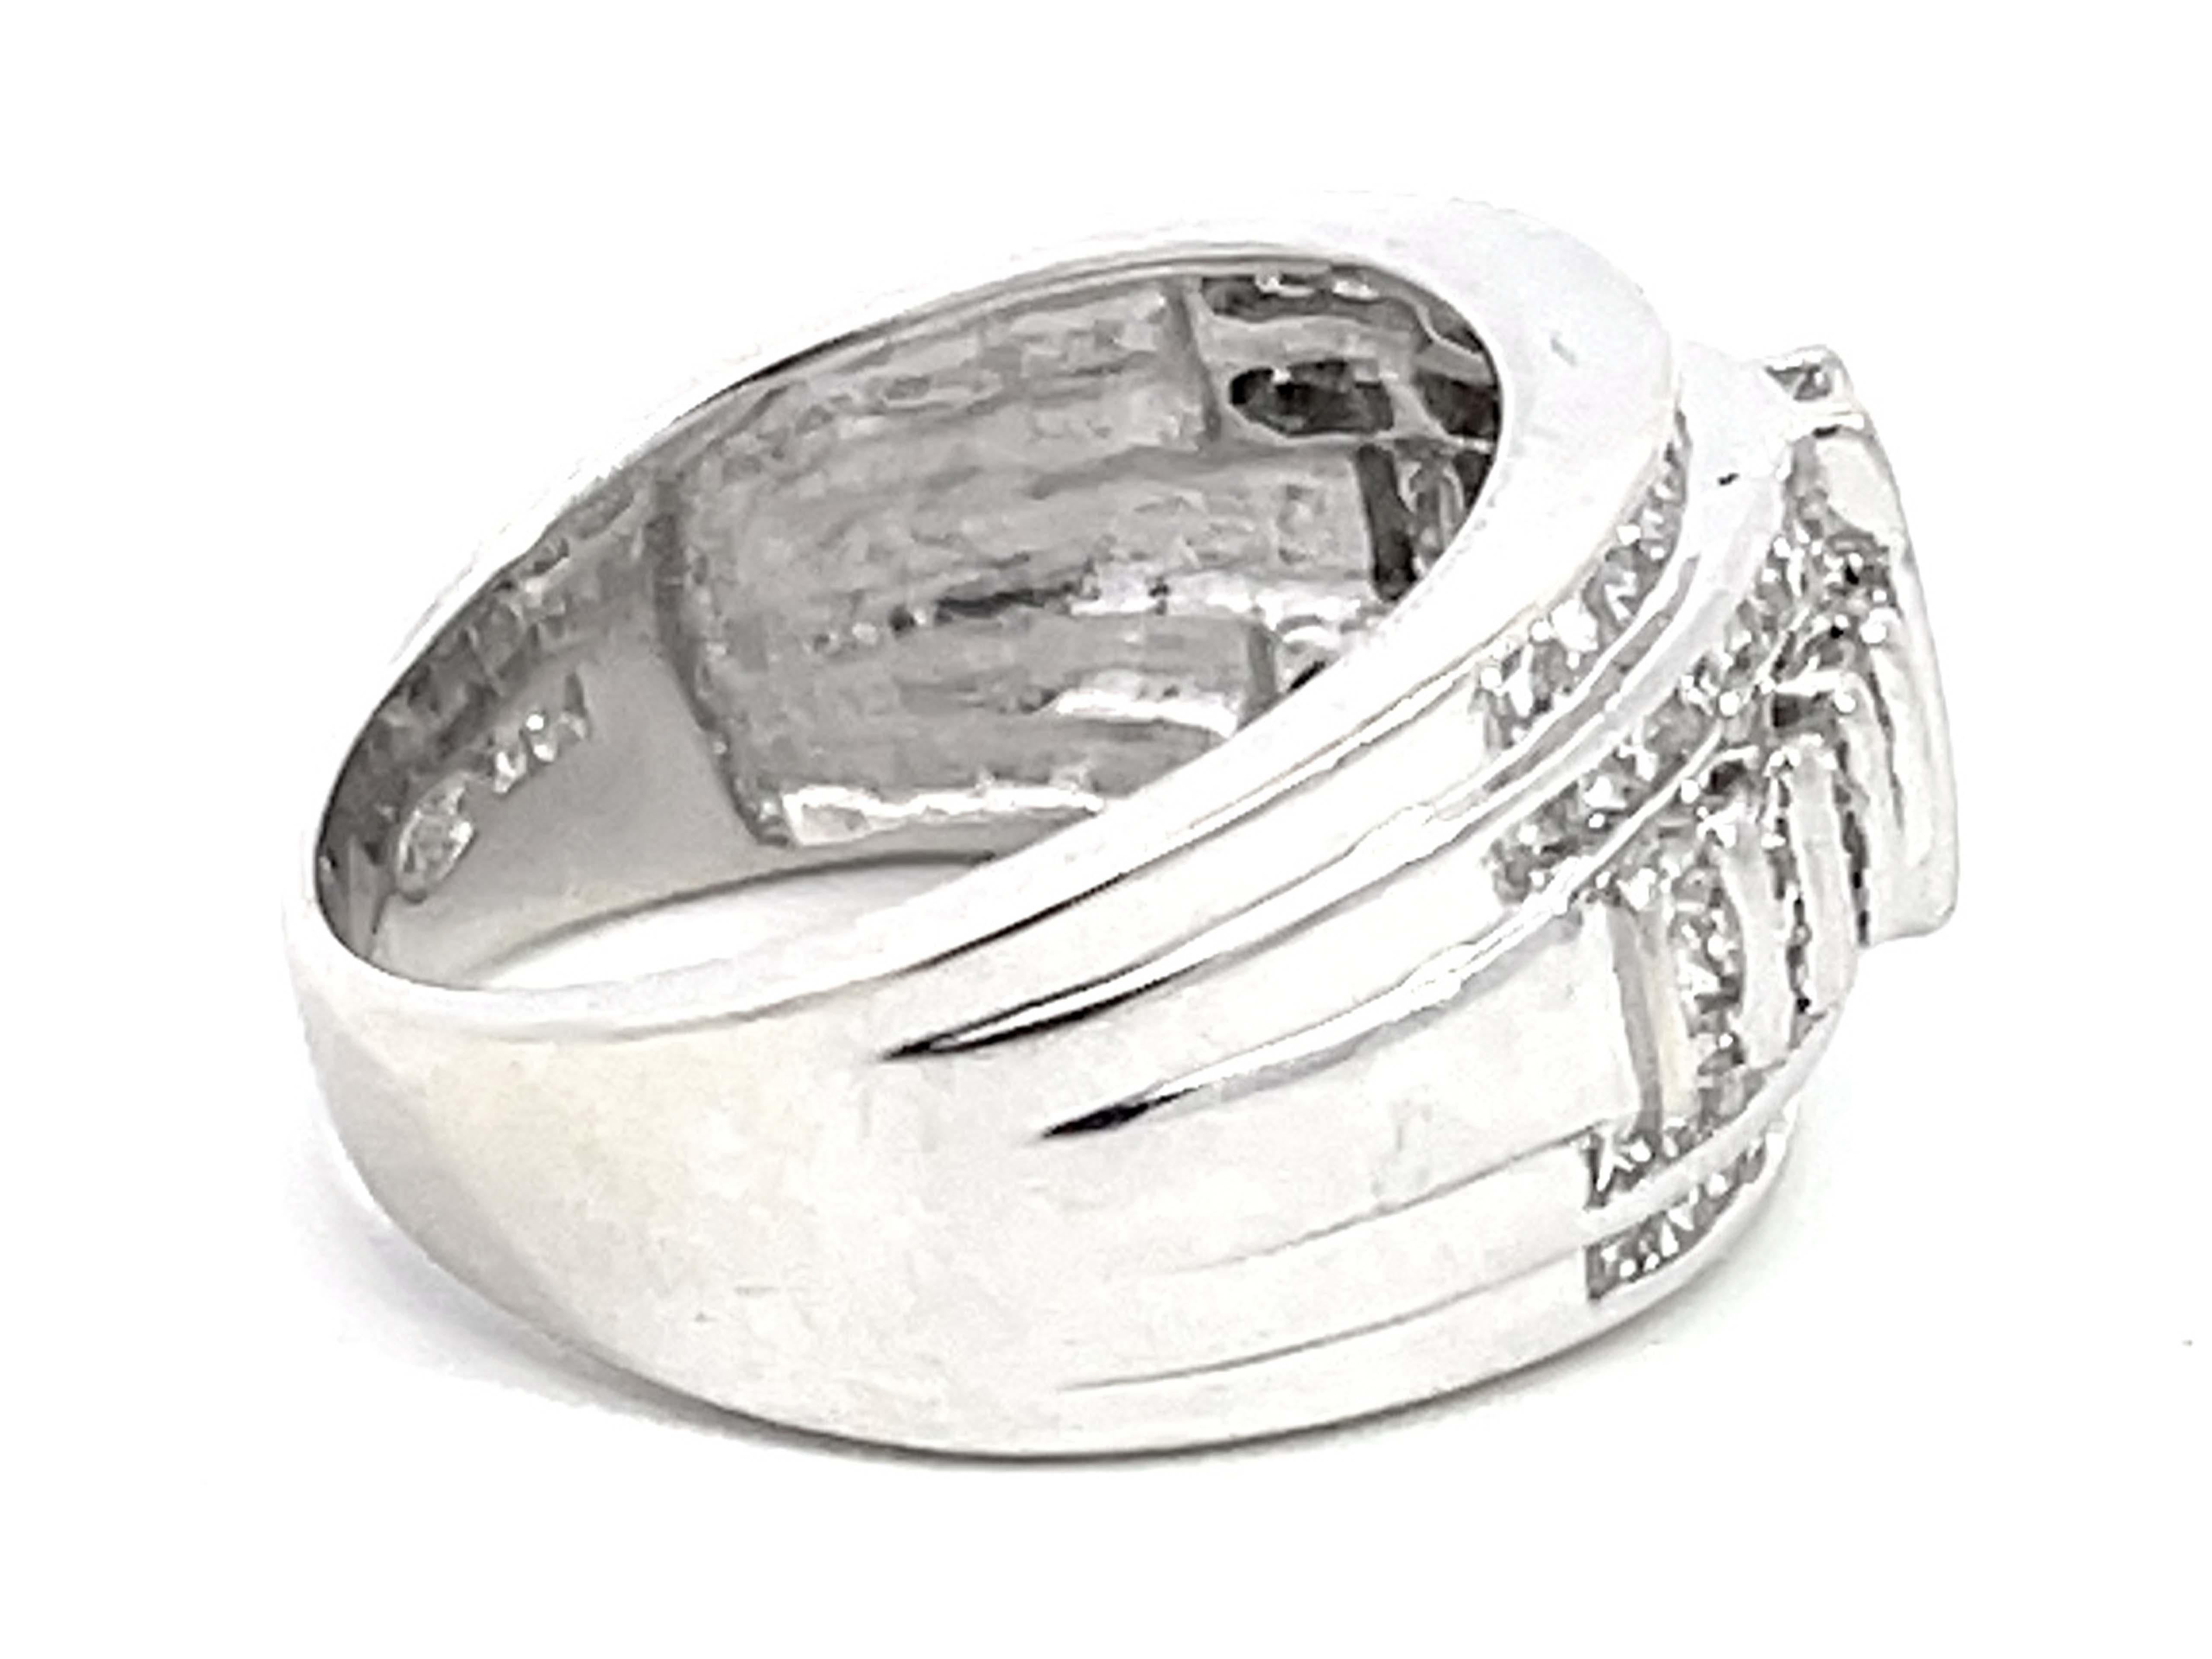 2.00 Carat Princess Cut Diamond Dome Band Ring in 14k White Gold In Excellent Condition For Sale In Honolulu, HI